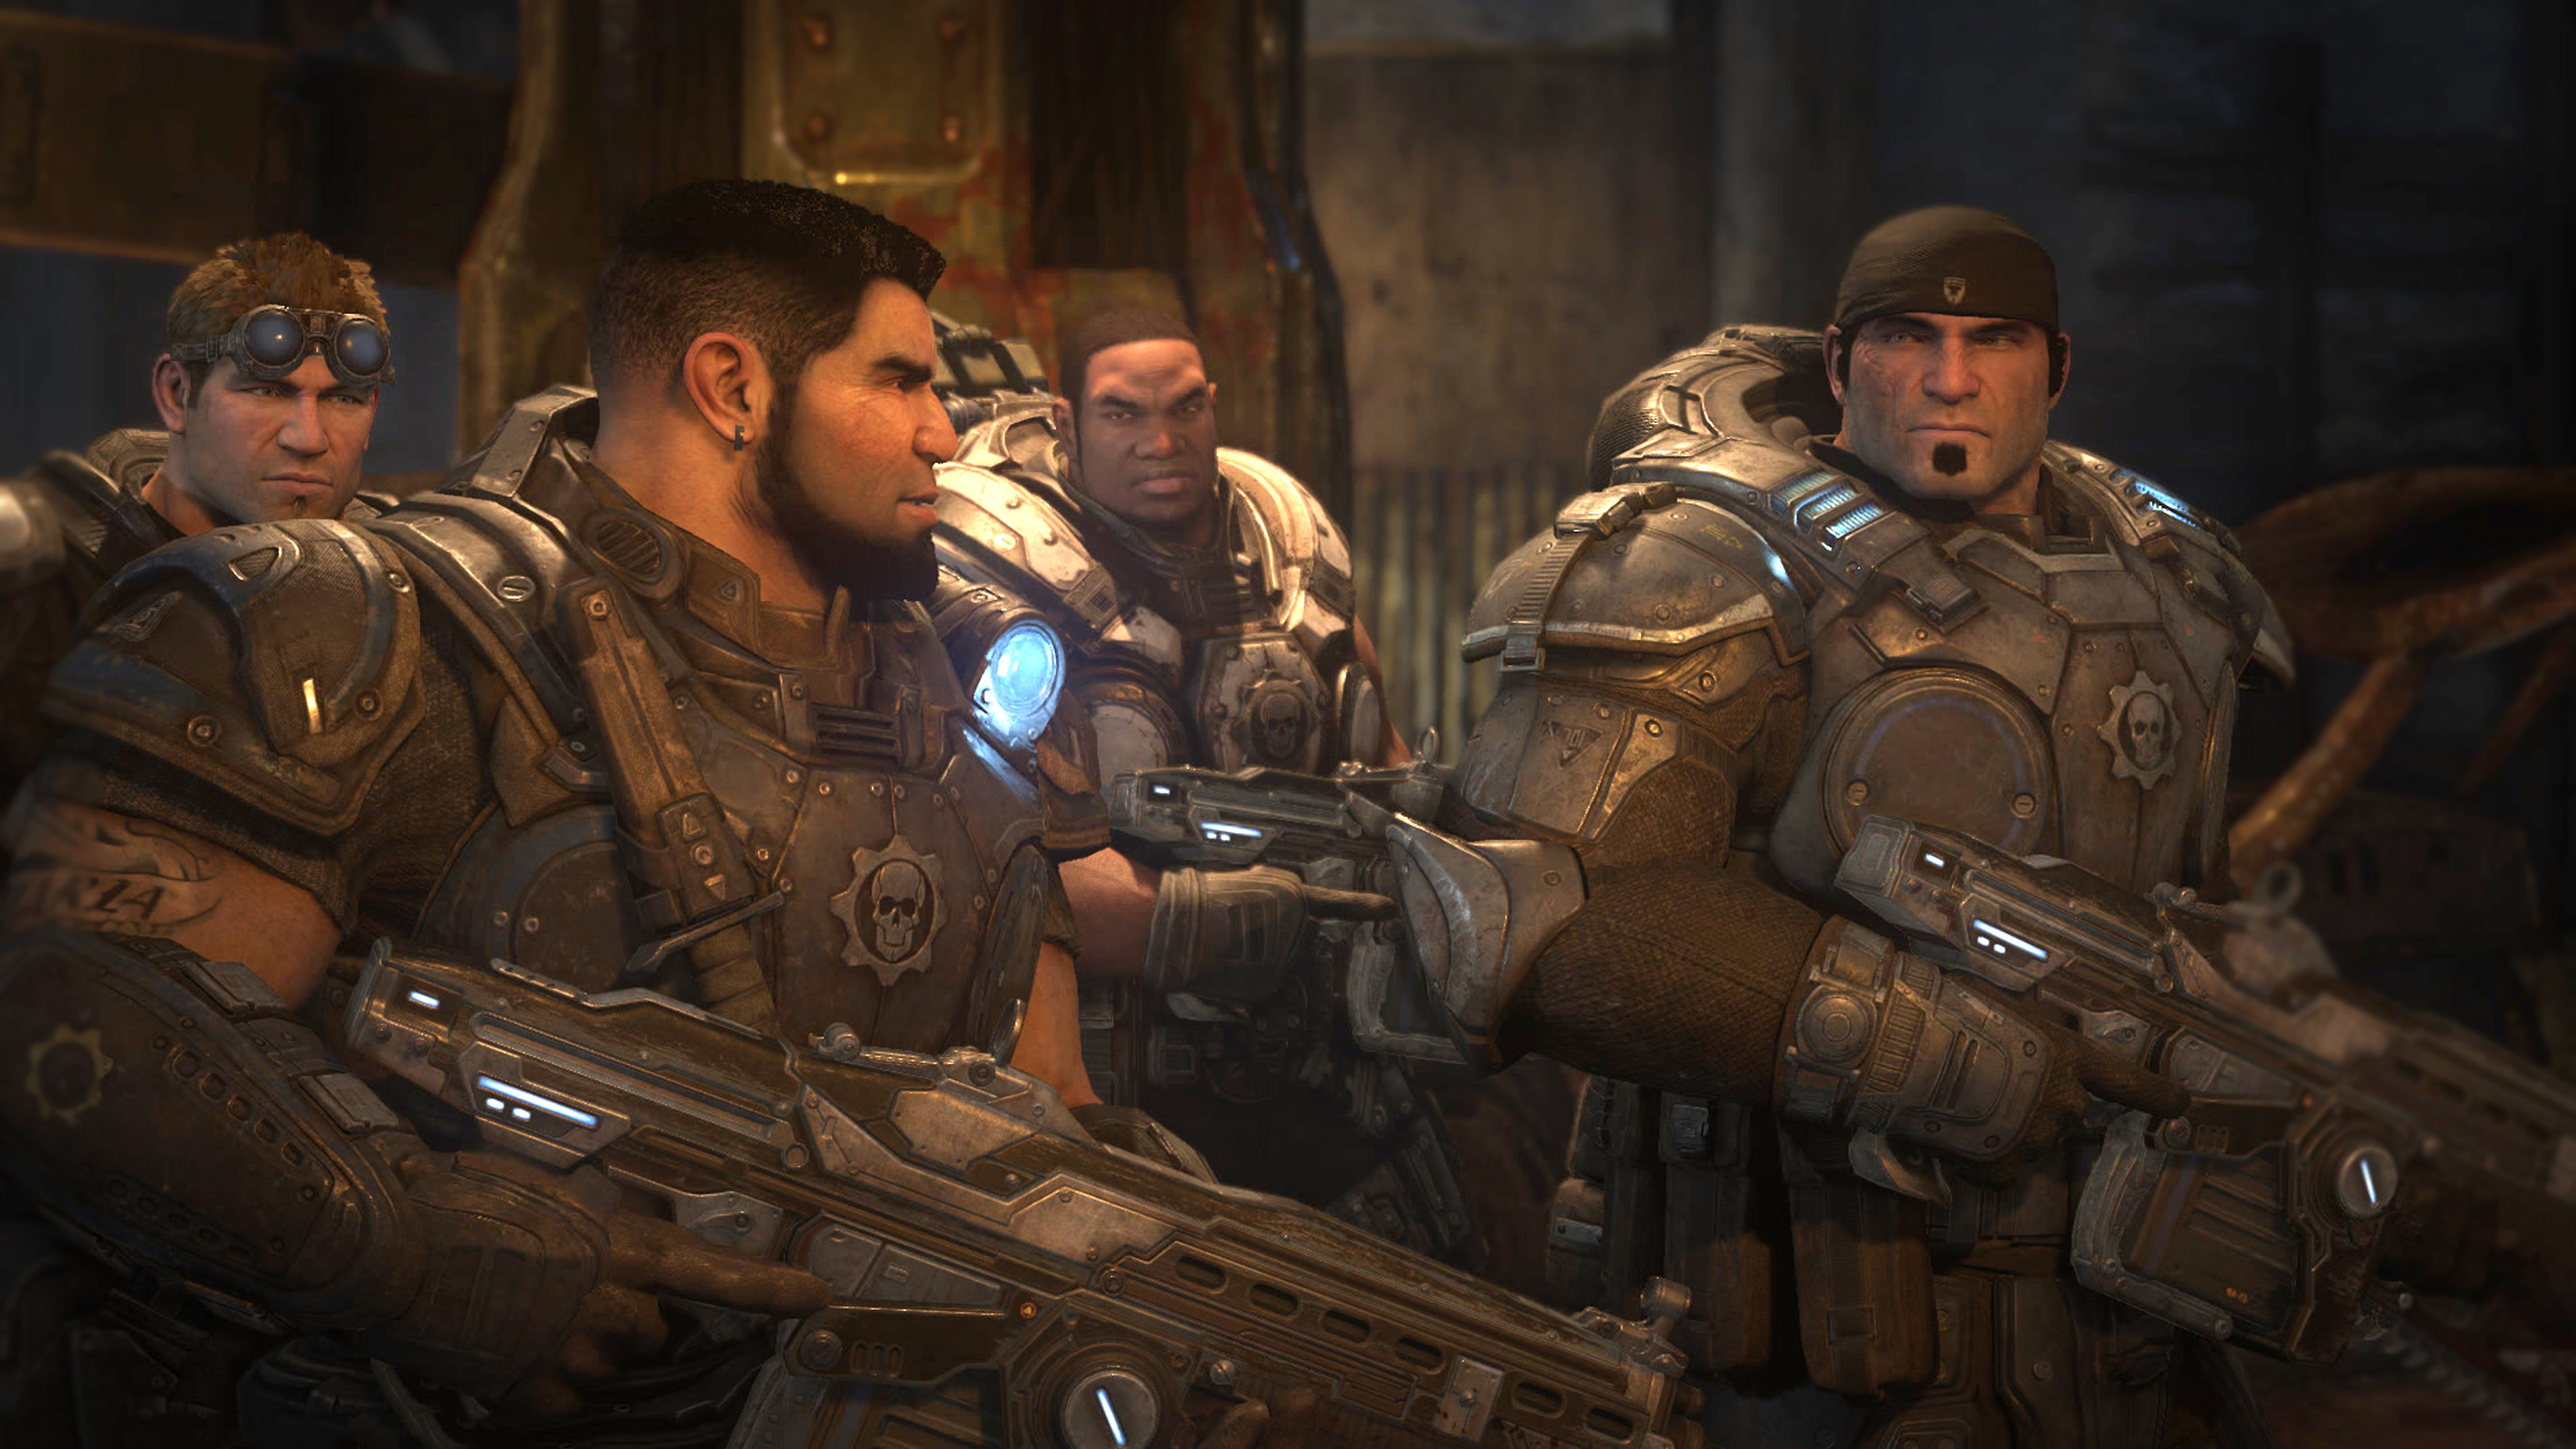 Gears of War 3 - ALL COLLECTIBLES LOCATION GUIDE 